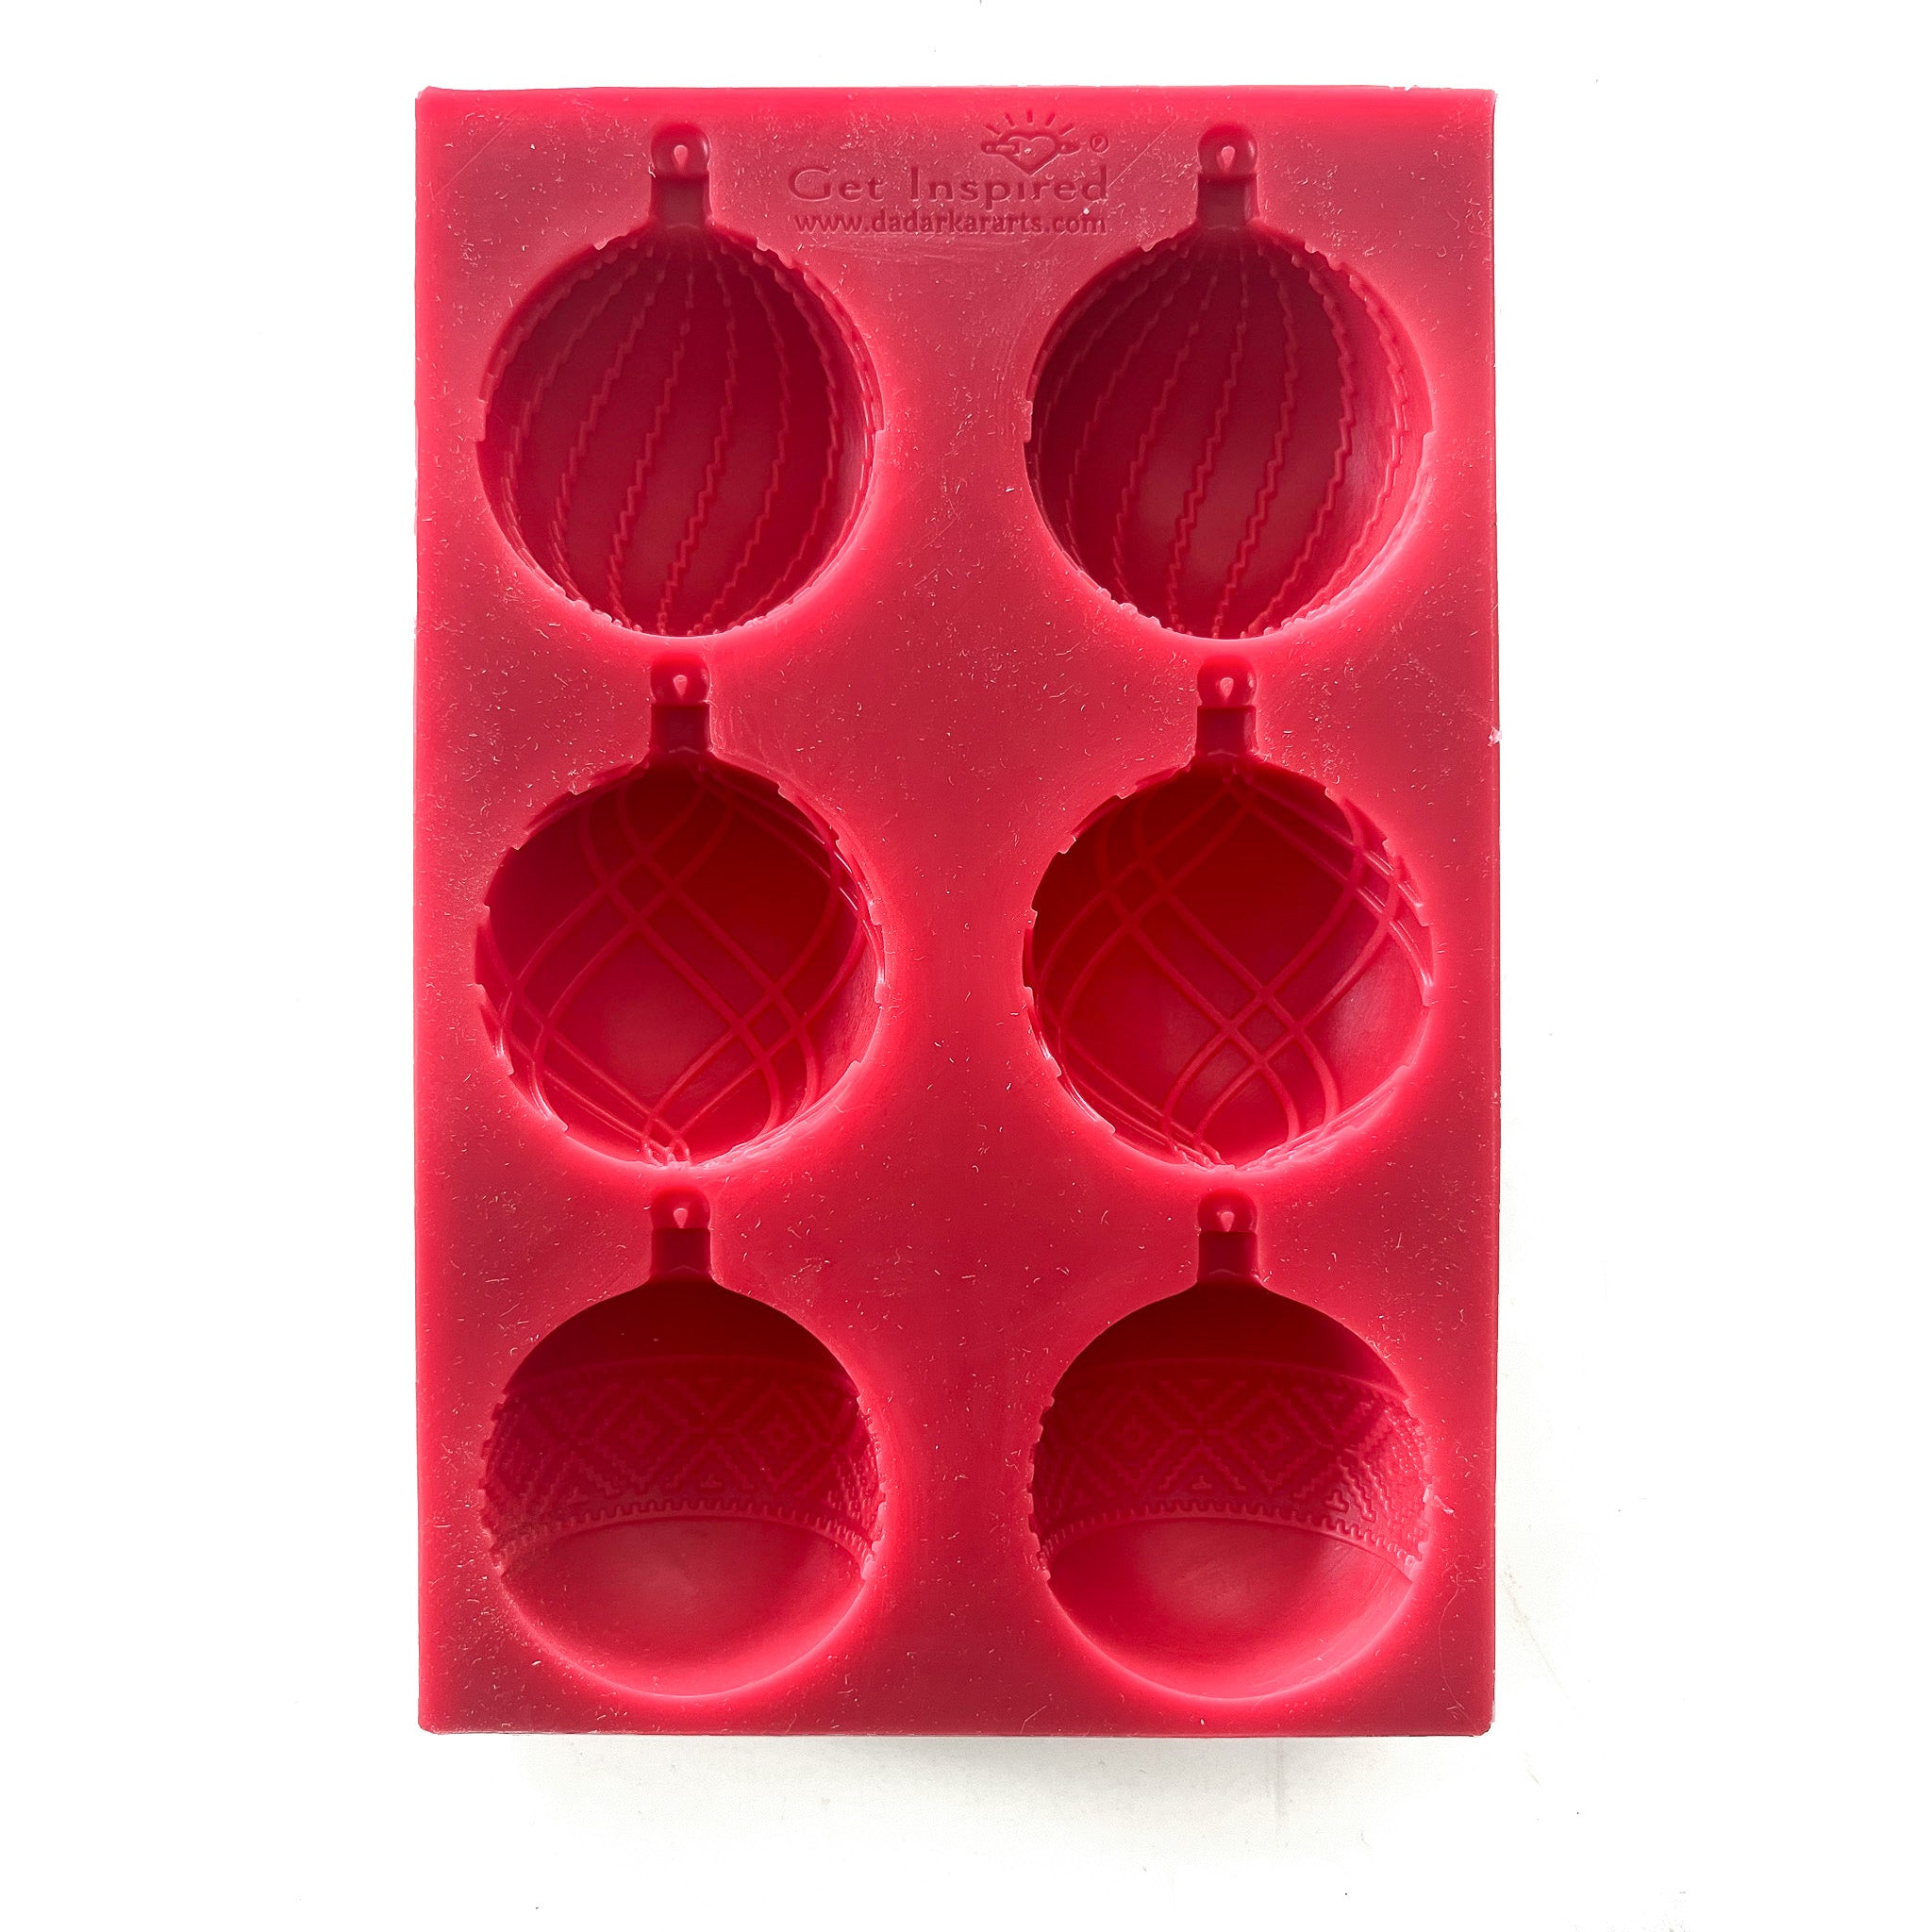 A red silicone mould of Get Inspired by Dadarkar Art's Christmas Ornaments is against a white background.